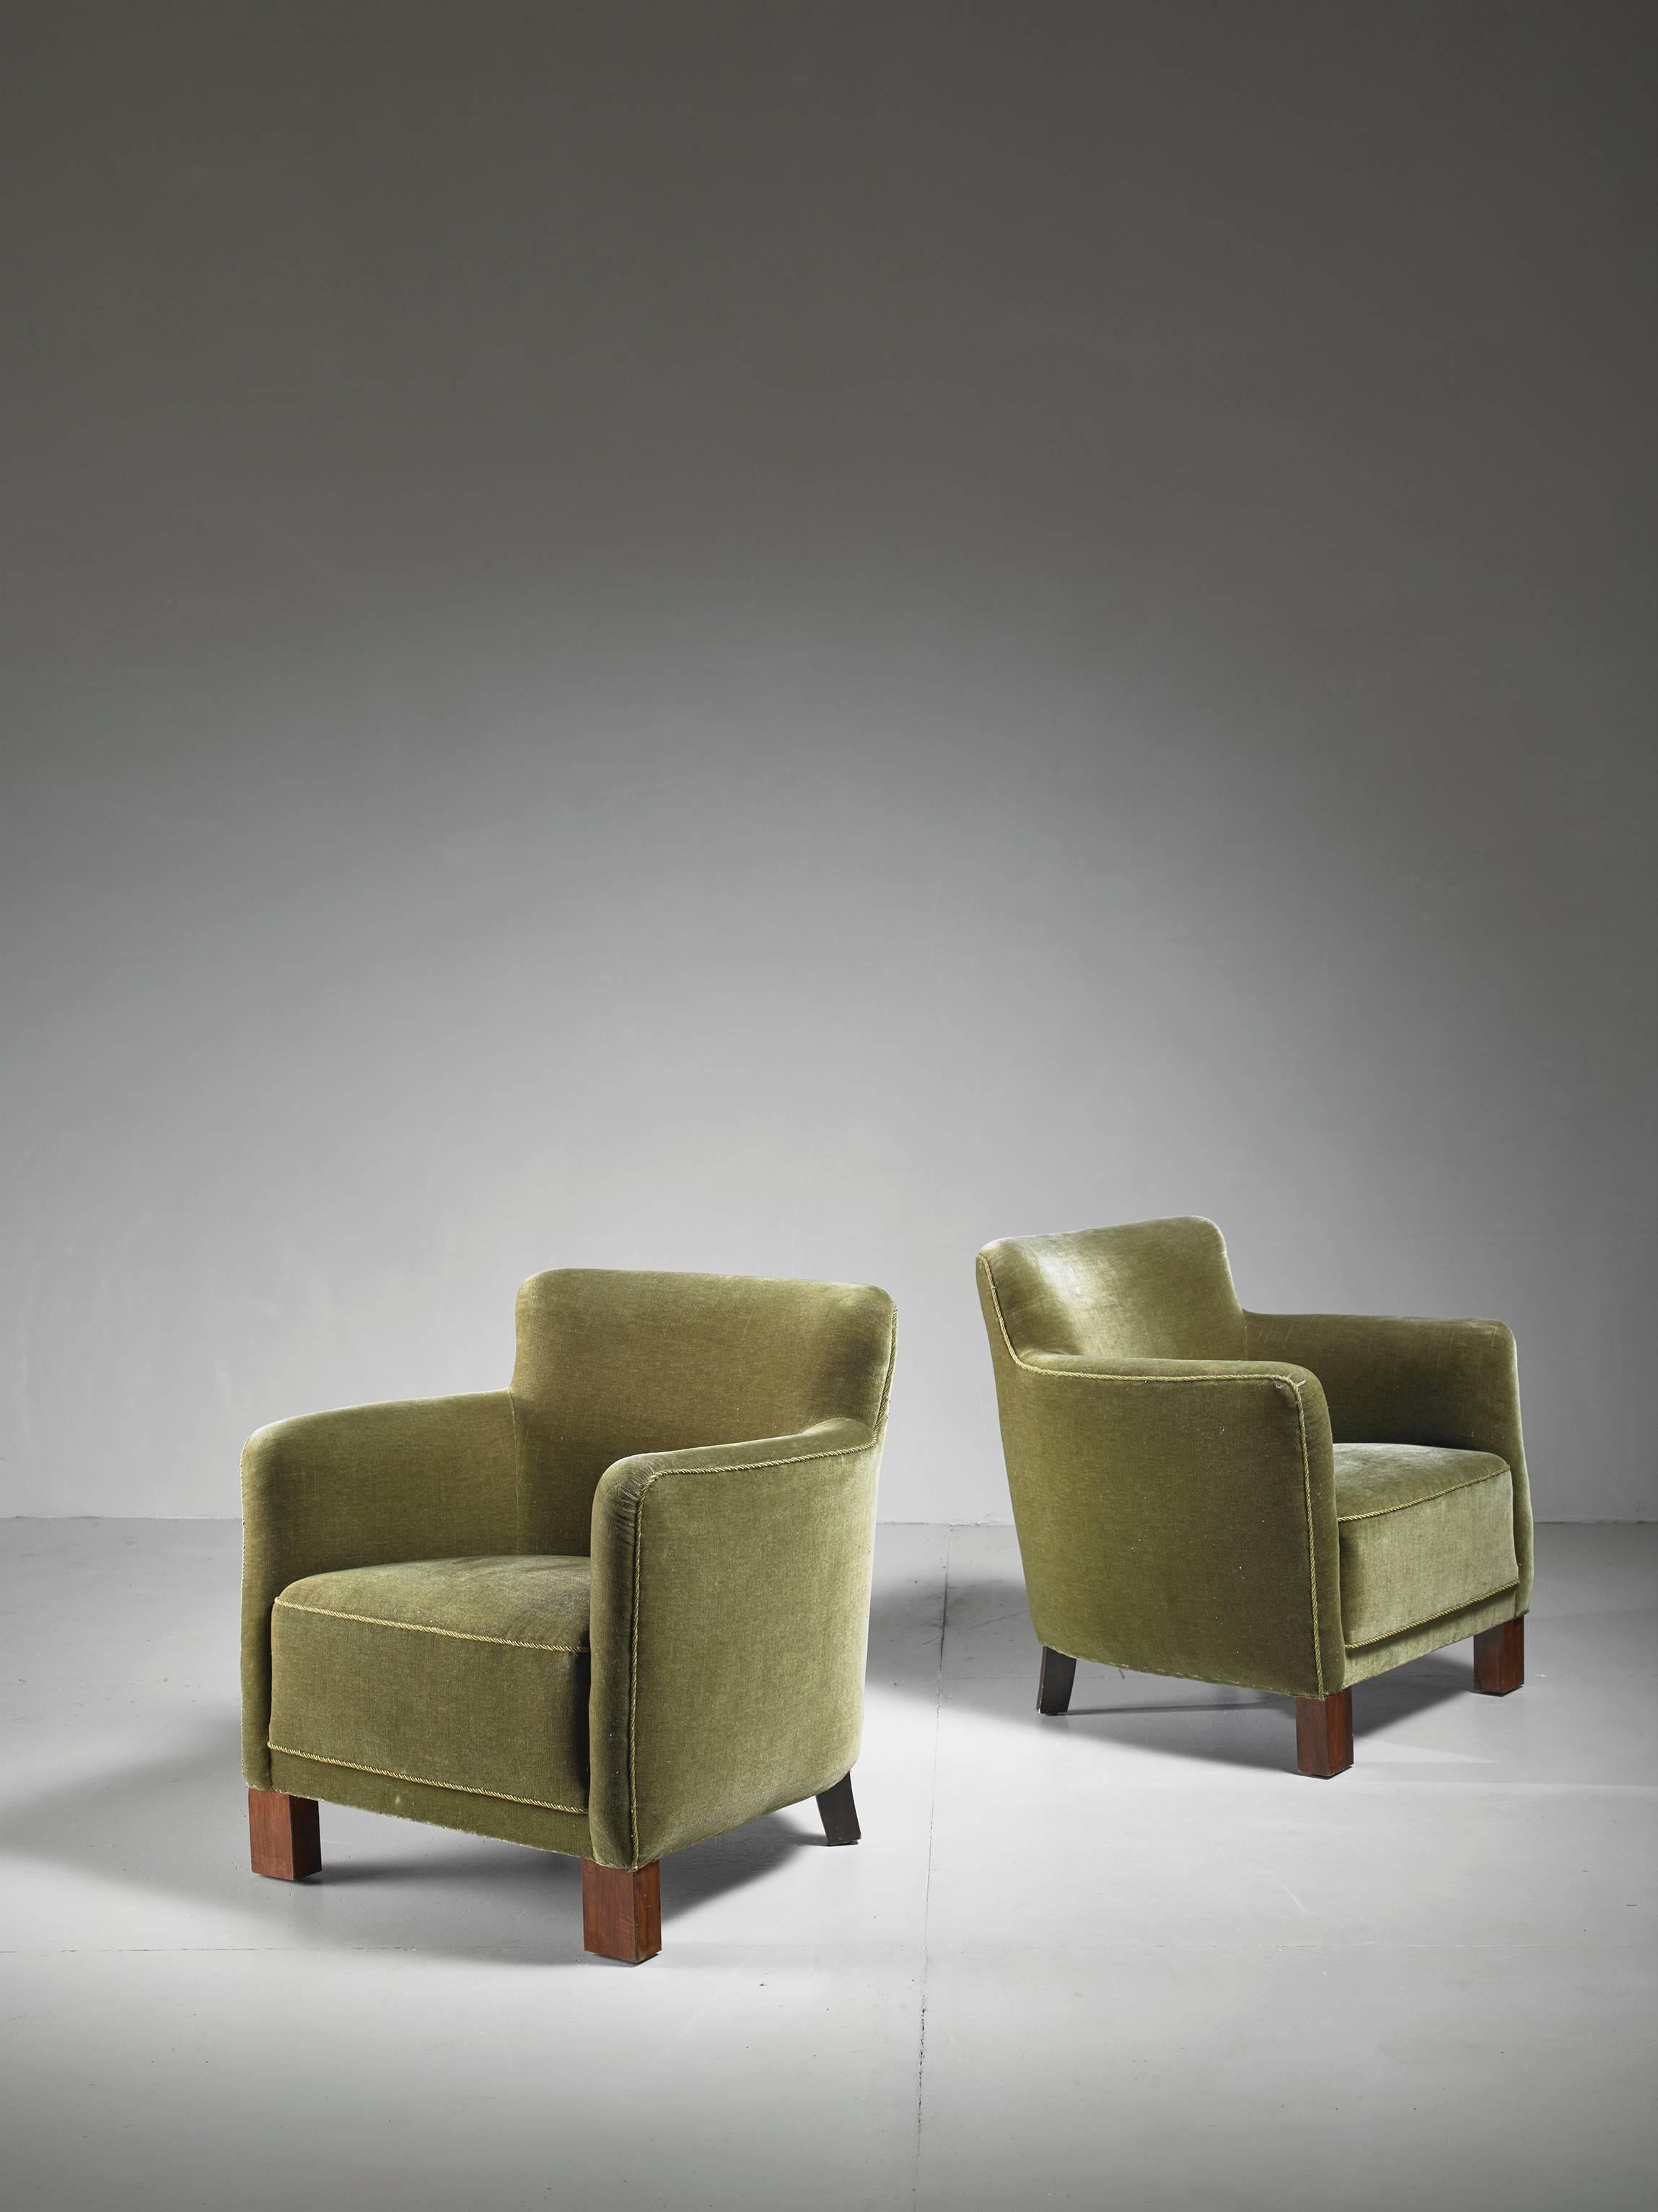 A pair of Danish club chairs with a gorgeous green velvet upholstery.
* These chairs are offered to you by Bloomberry, Amsterdam *